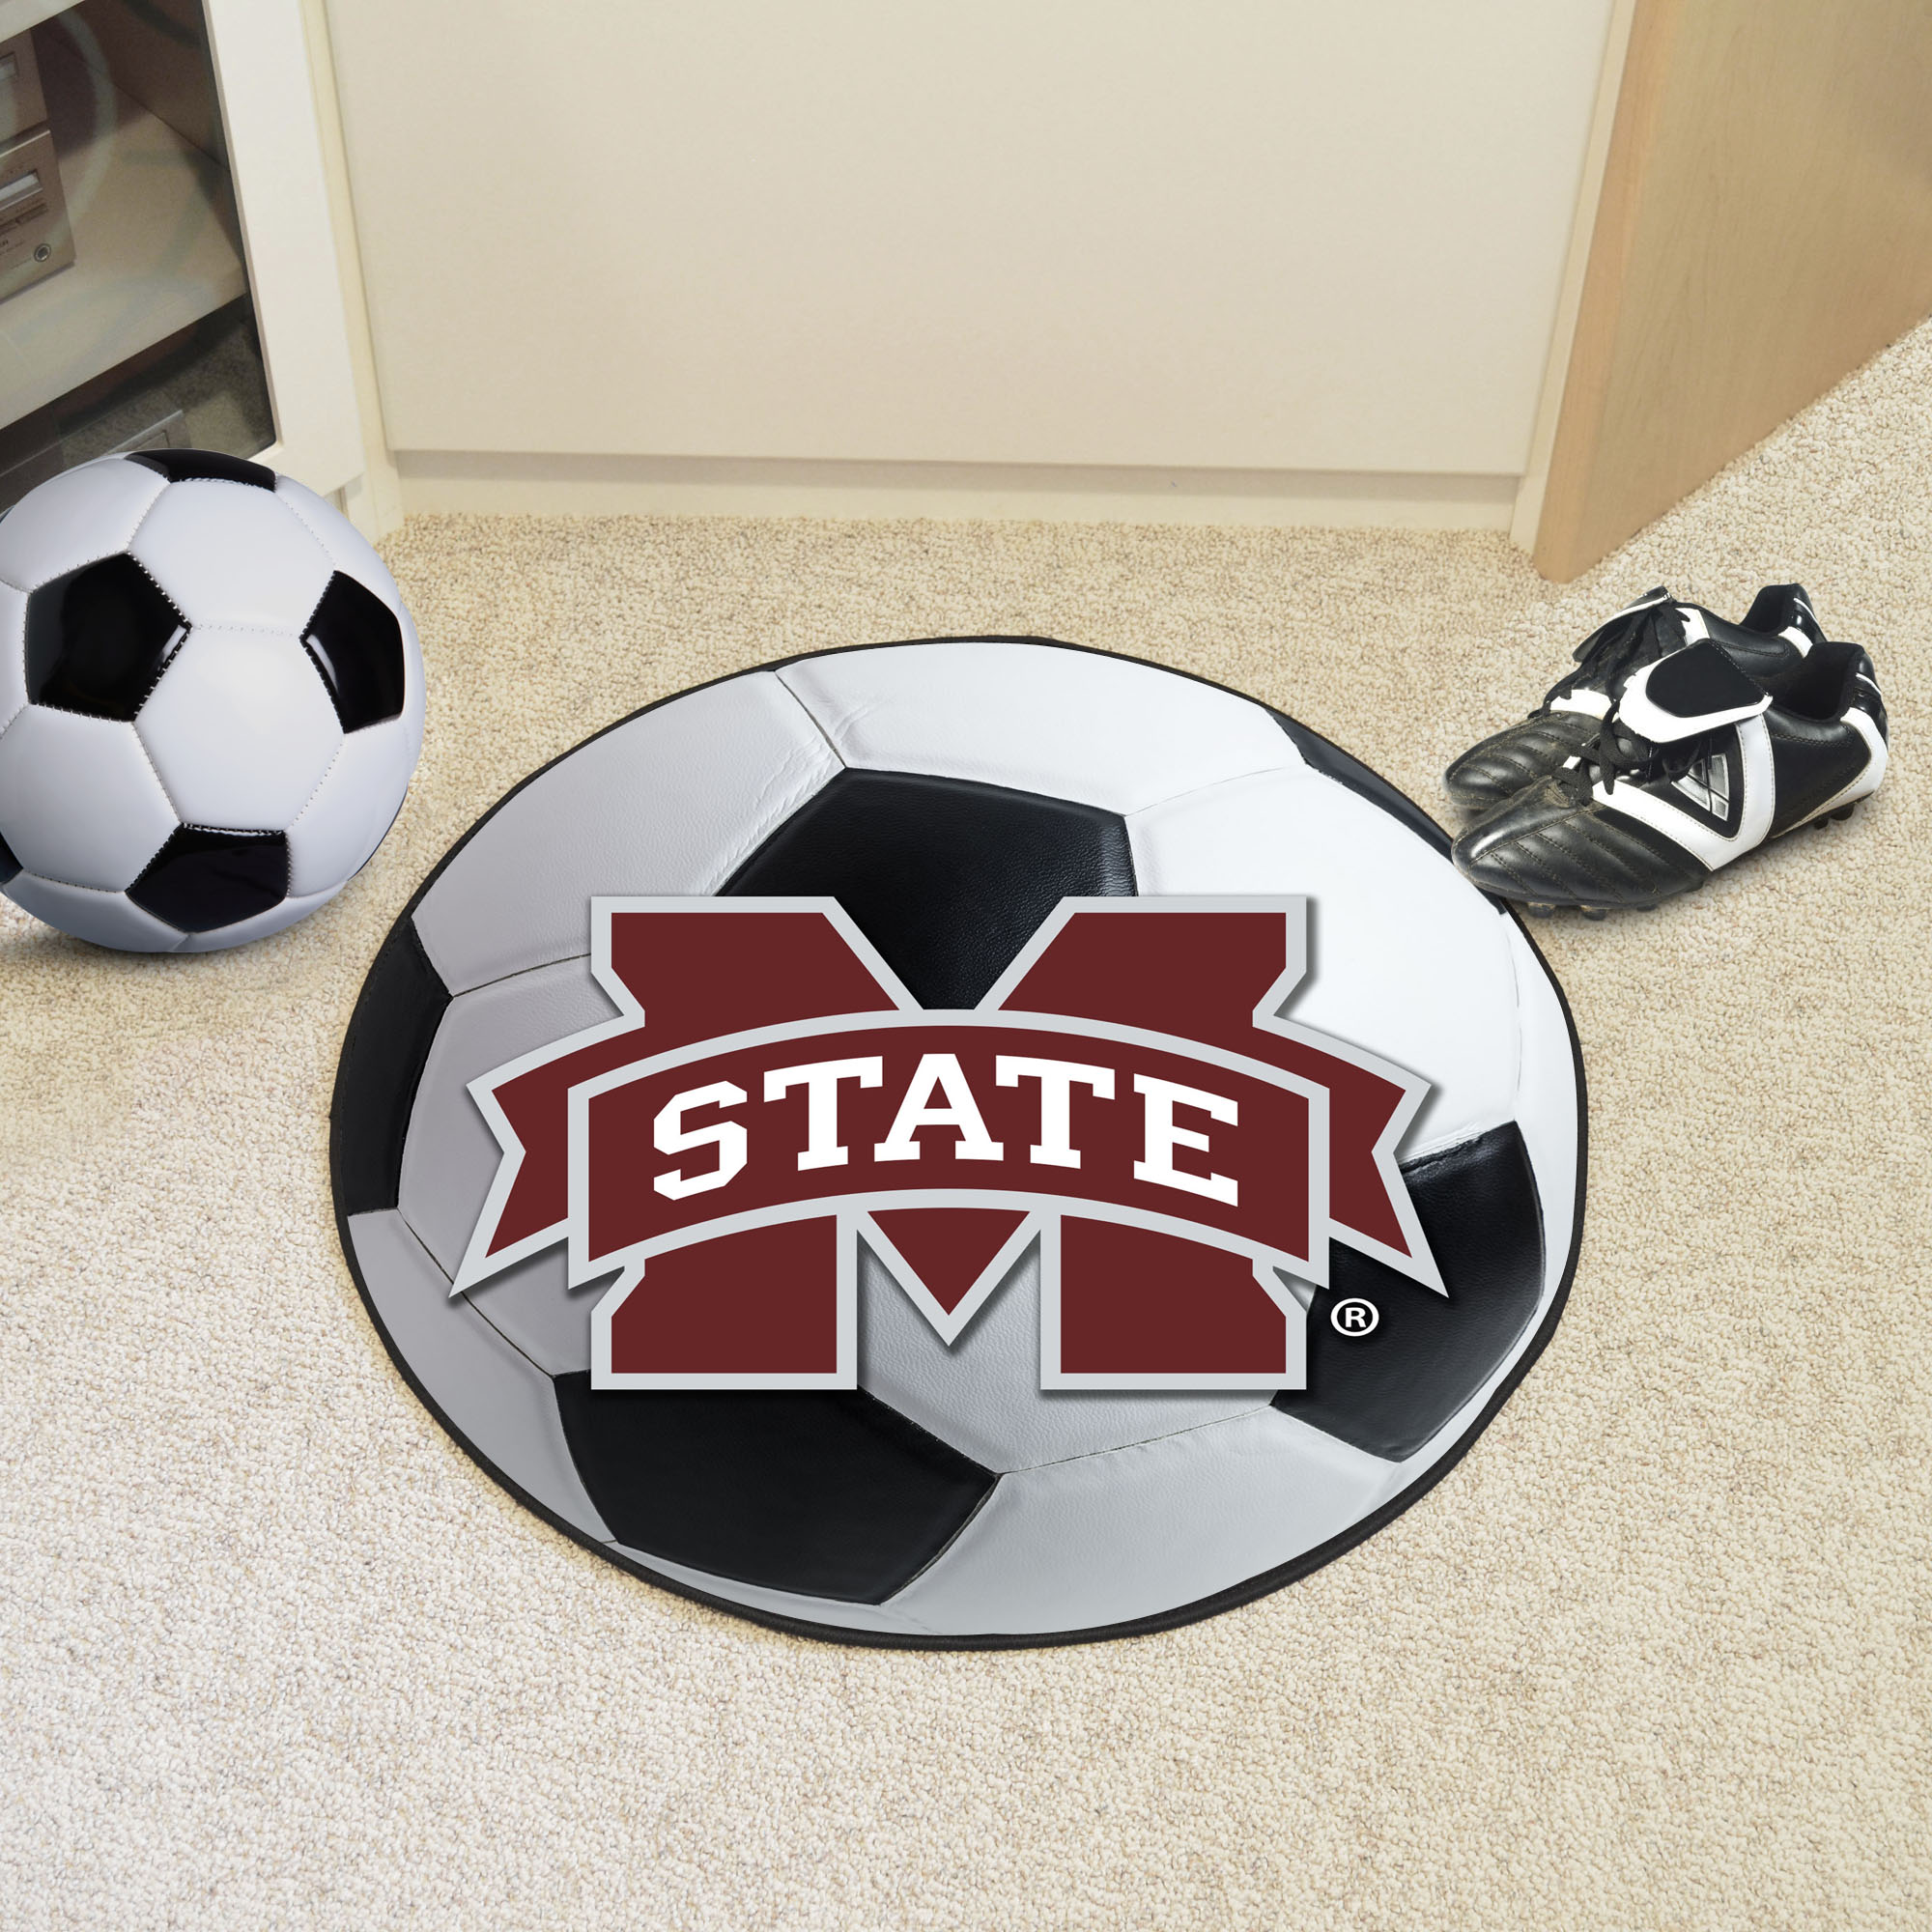 Mississippi State University Ball Shaped Area Rugs (Ball Shaped Area Rugs: Soccer Ball)